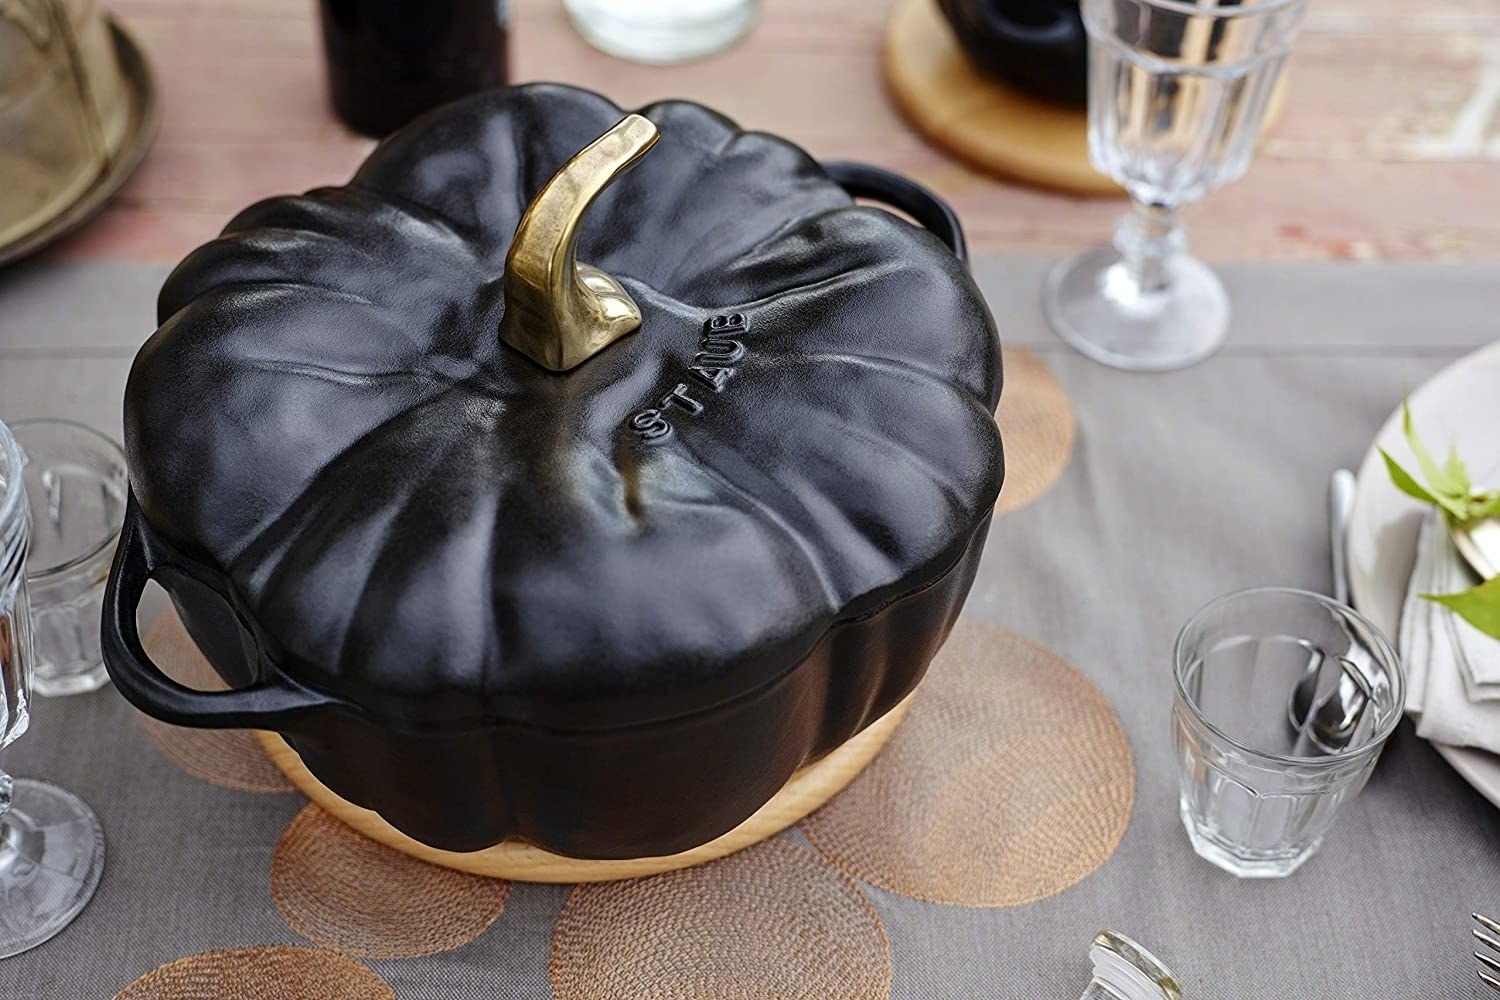 the pumpkin serving dish on a table